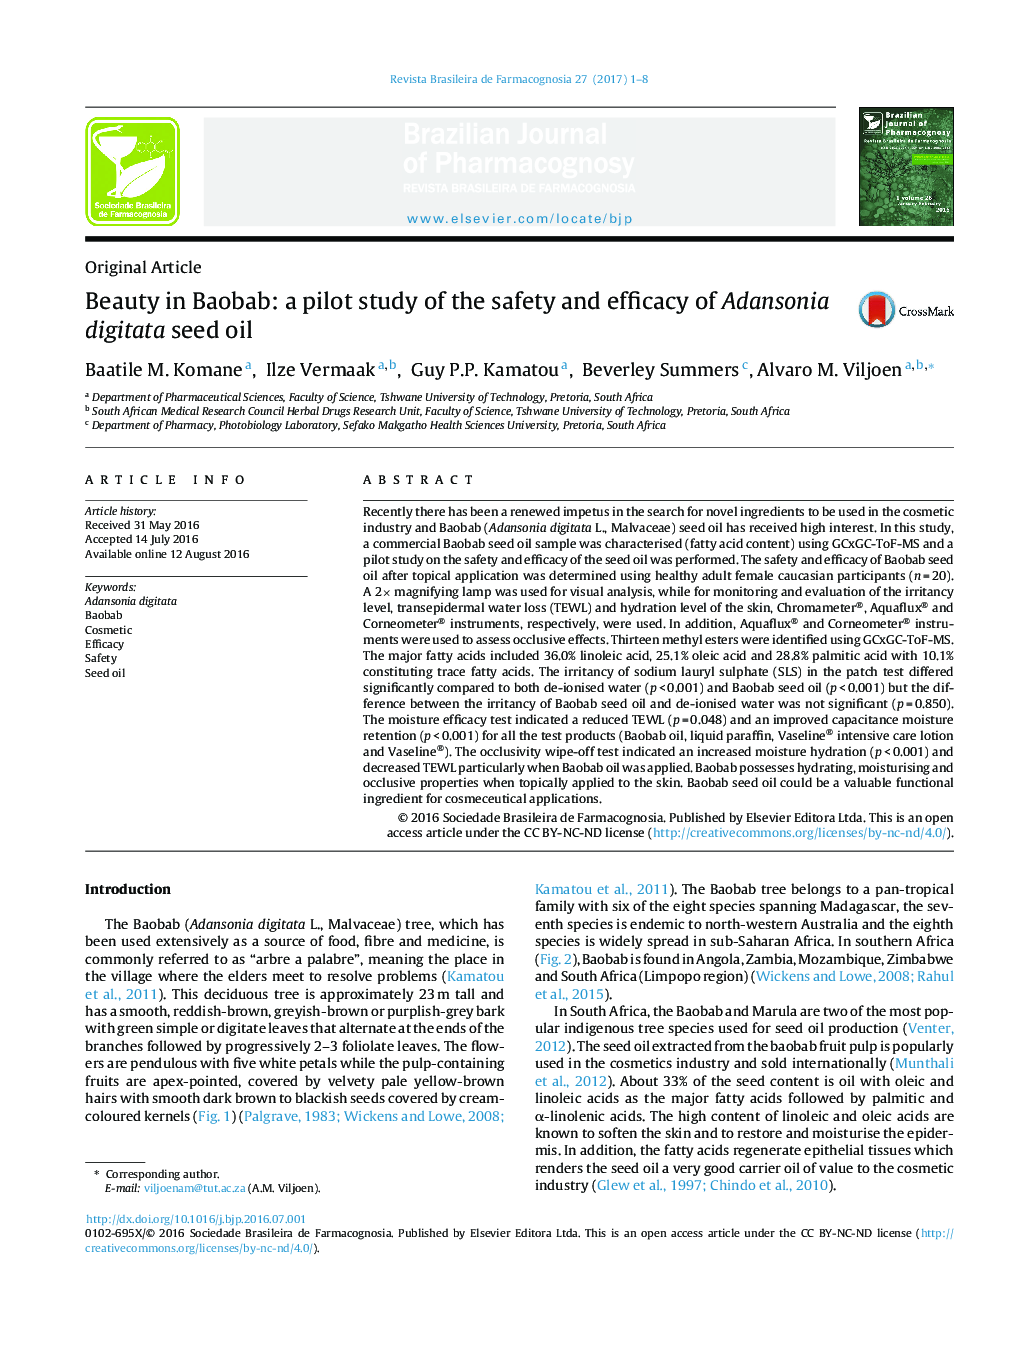 Beauty in Baobab: a pilot study of the safety and efficacy of Adansonia digitata seed oil